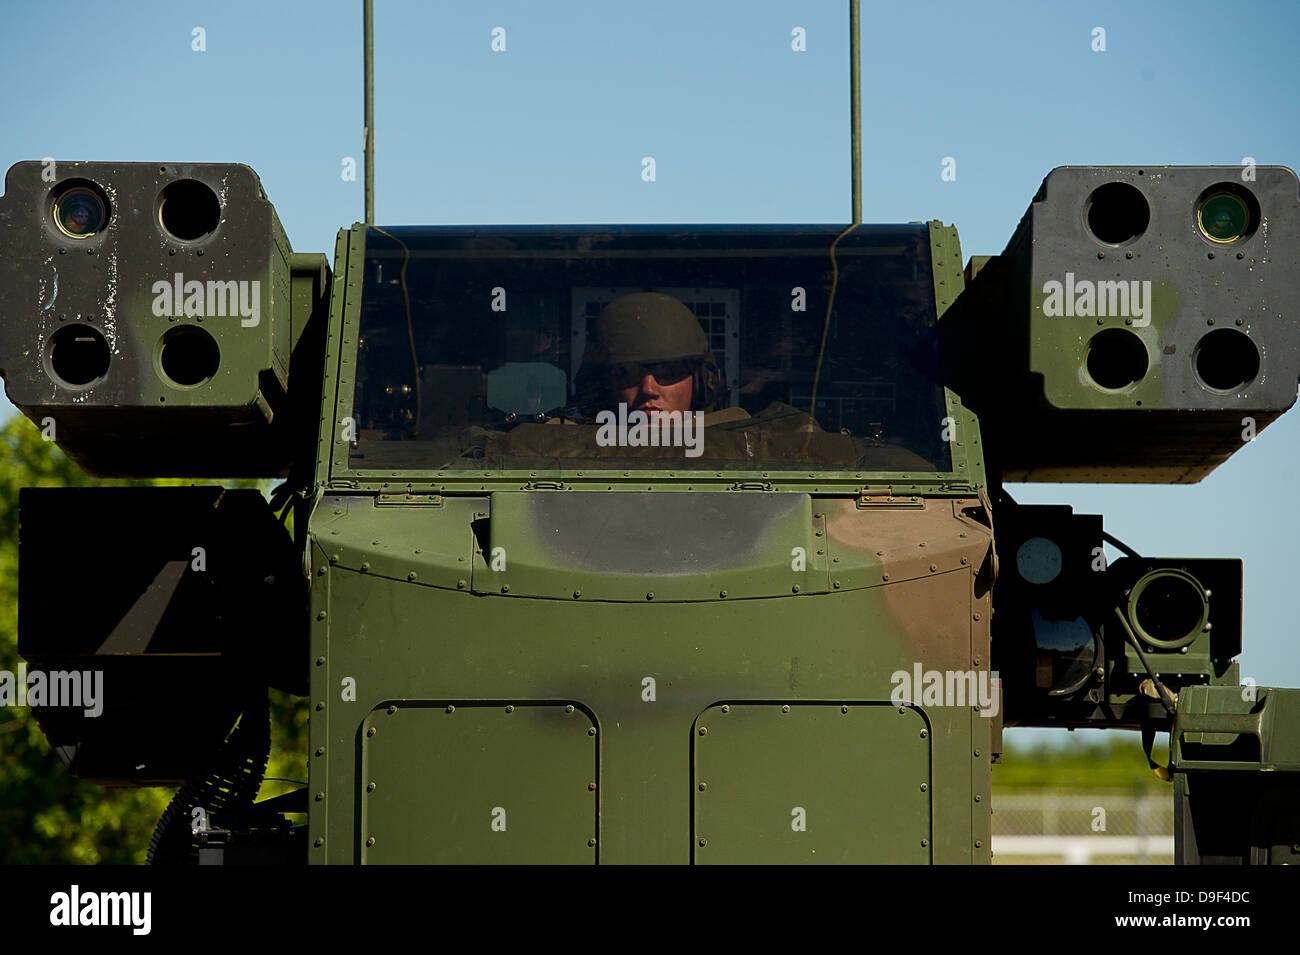 U.S. Army Specialist operates an Avenger missile system. Stock Photo